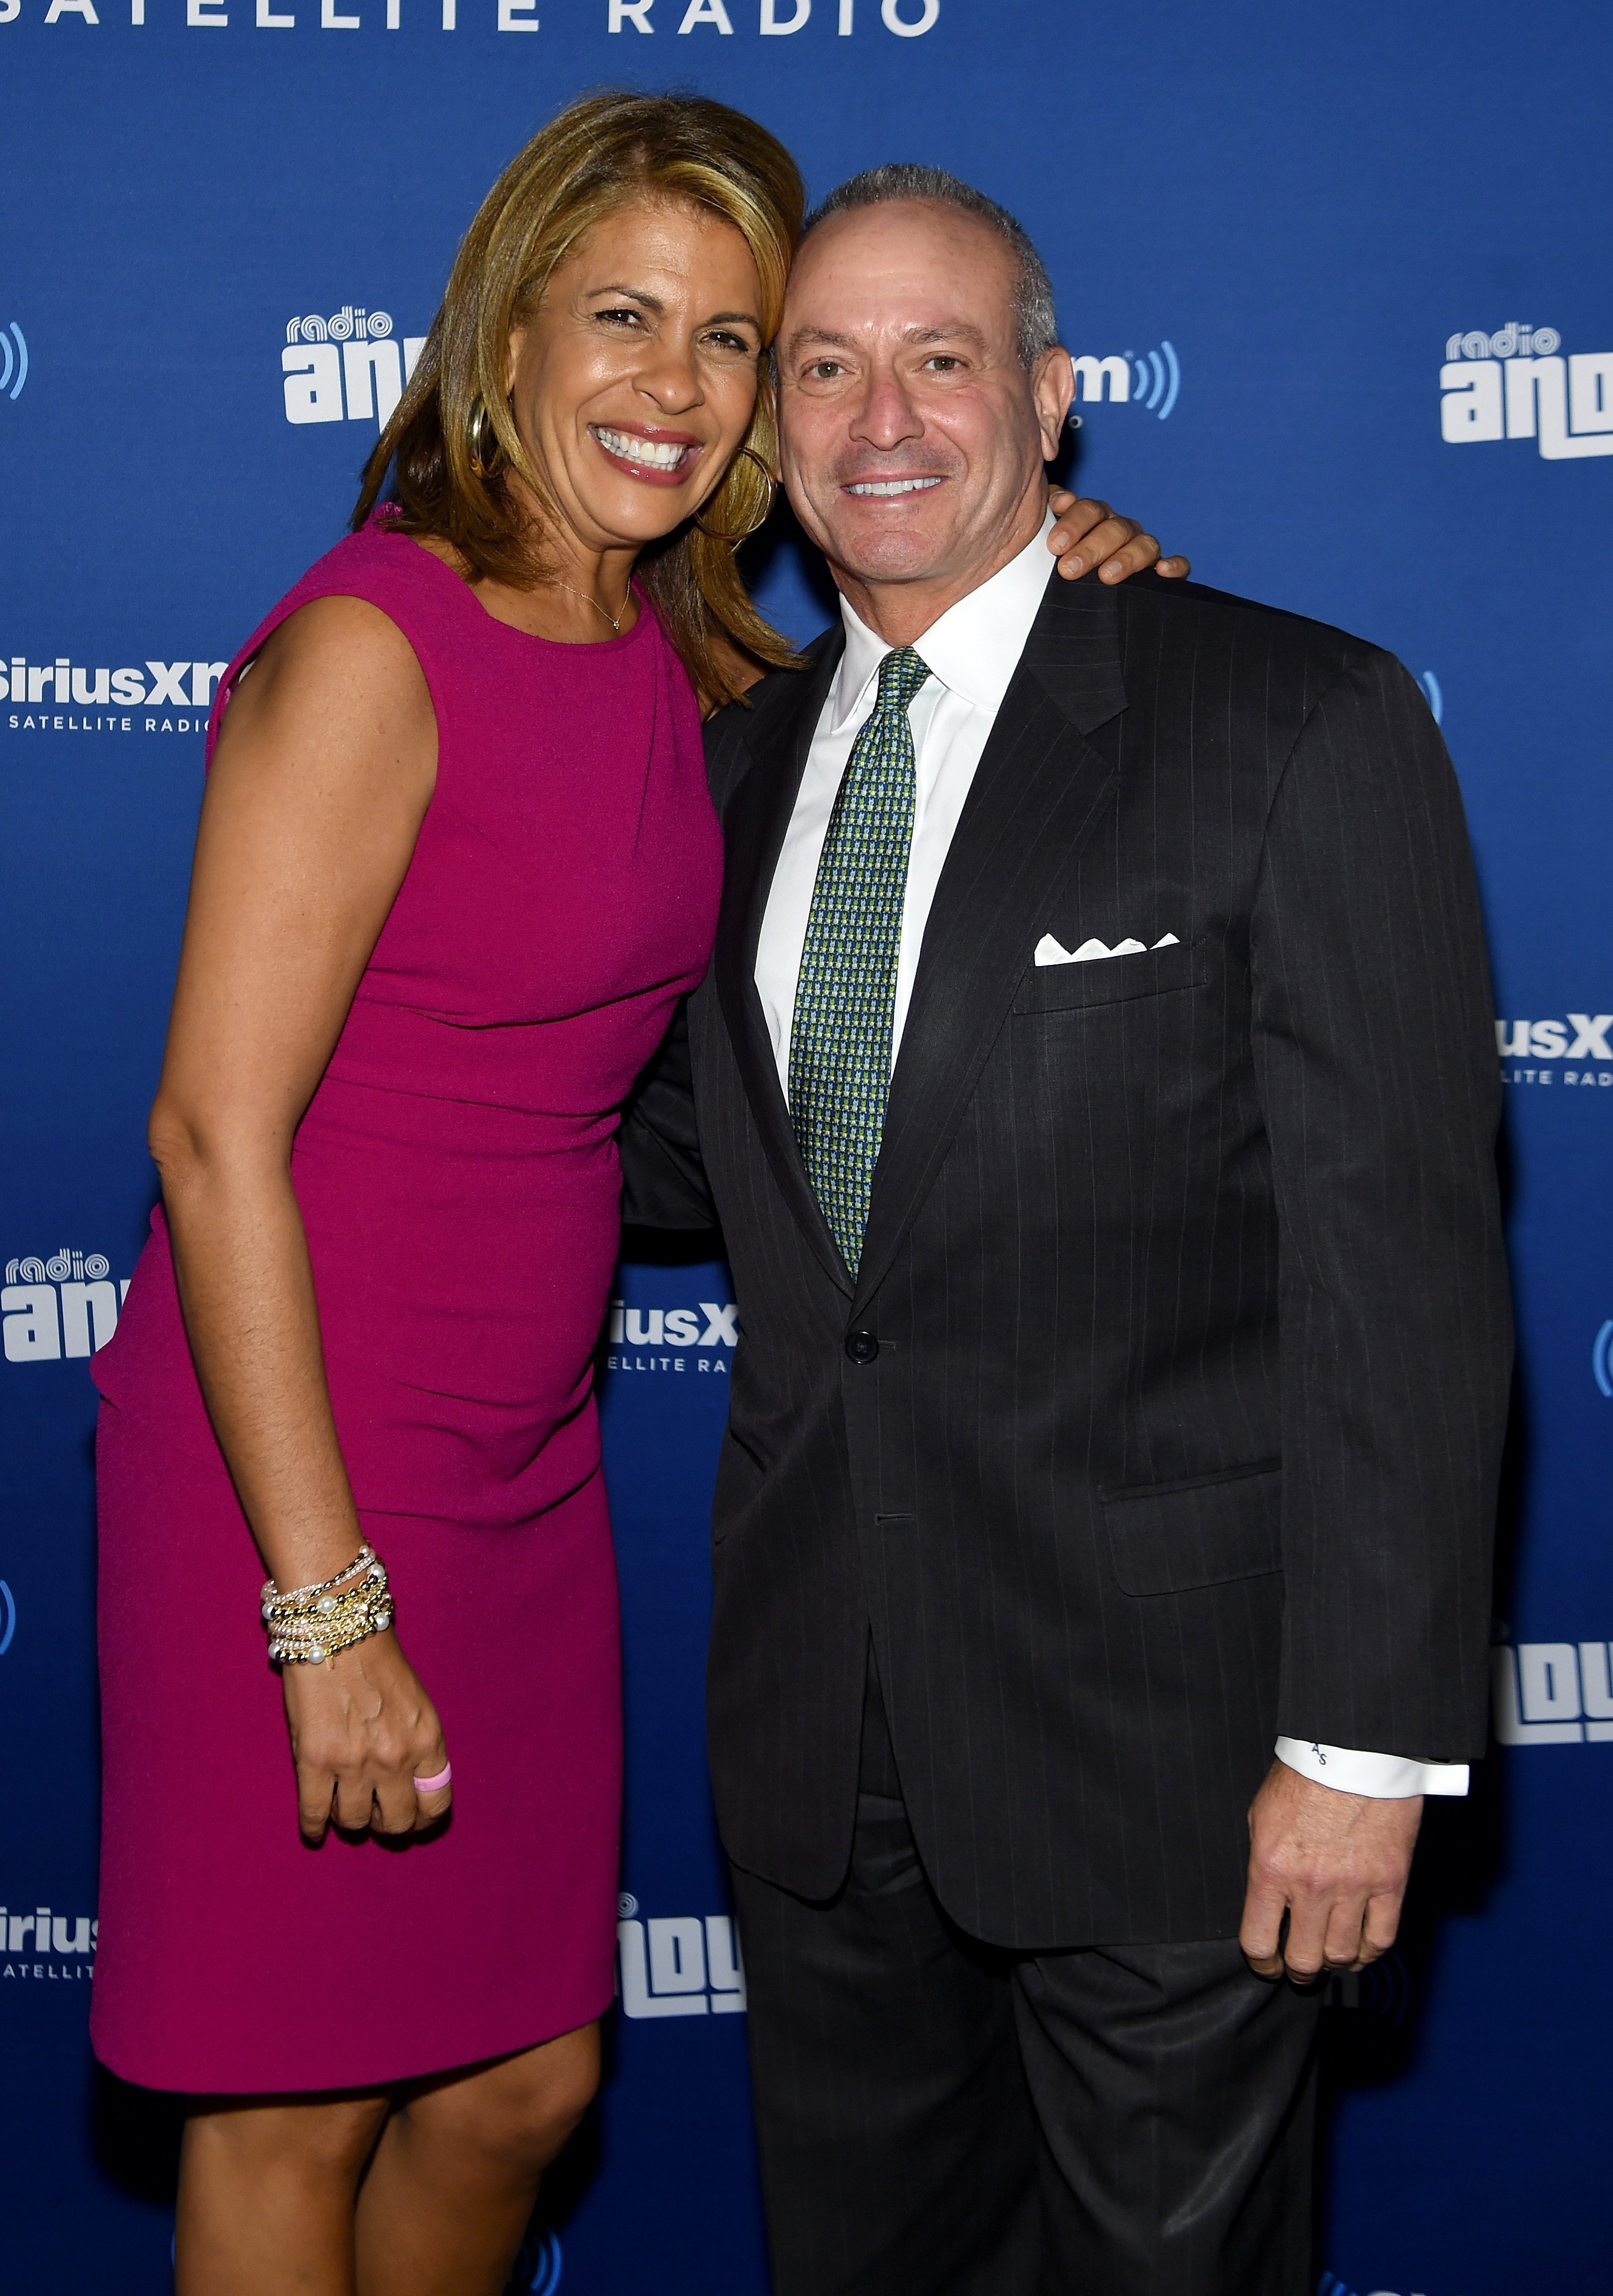 Hoda Kotb and Joel Schiffman attend the launch of SiriusXM's Radio Andy in New York City on October 22, 2015 | Photo: Getty Images